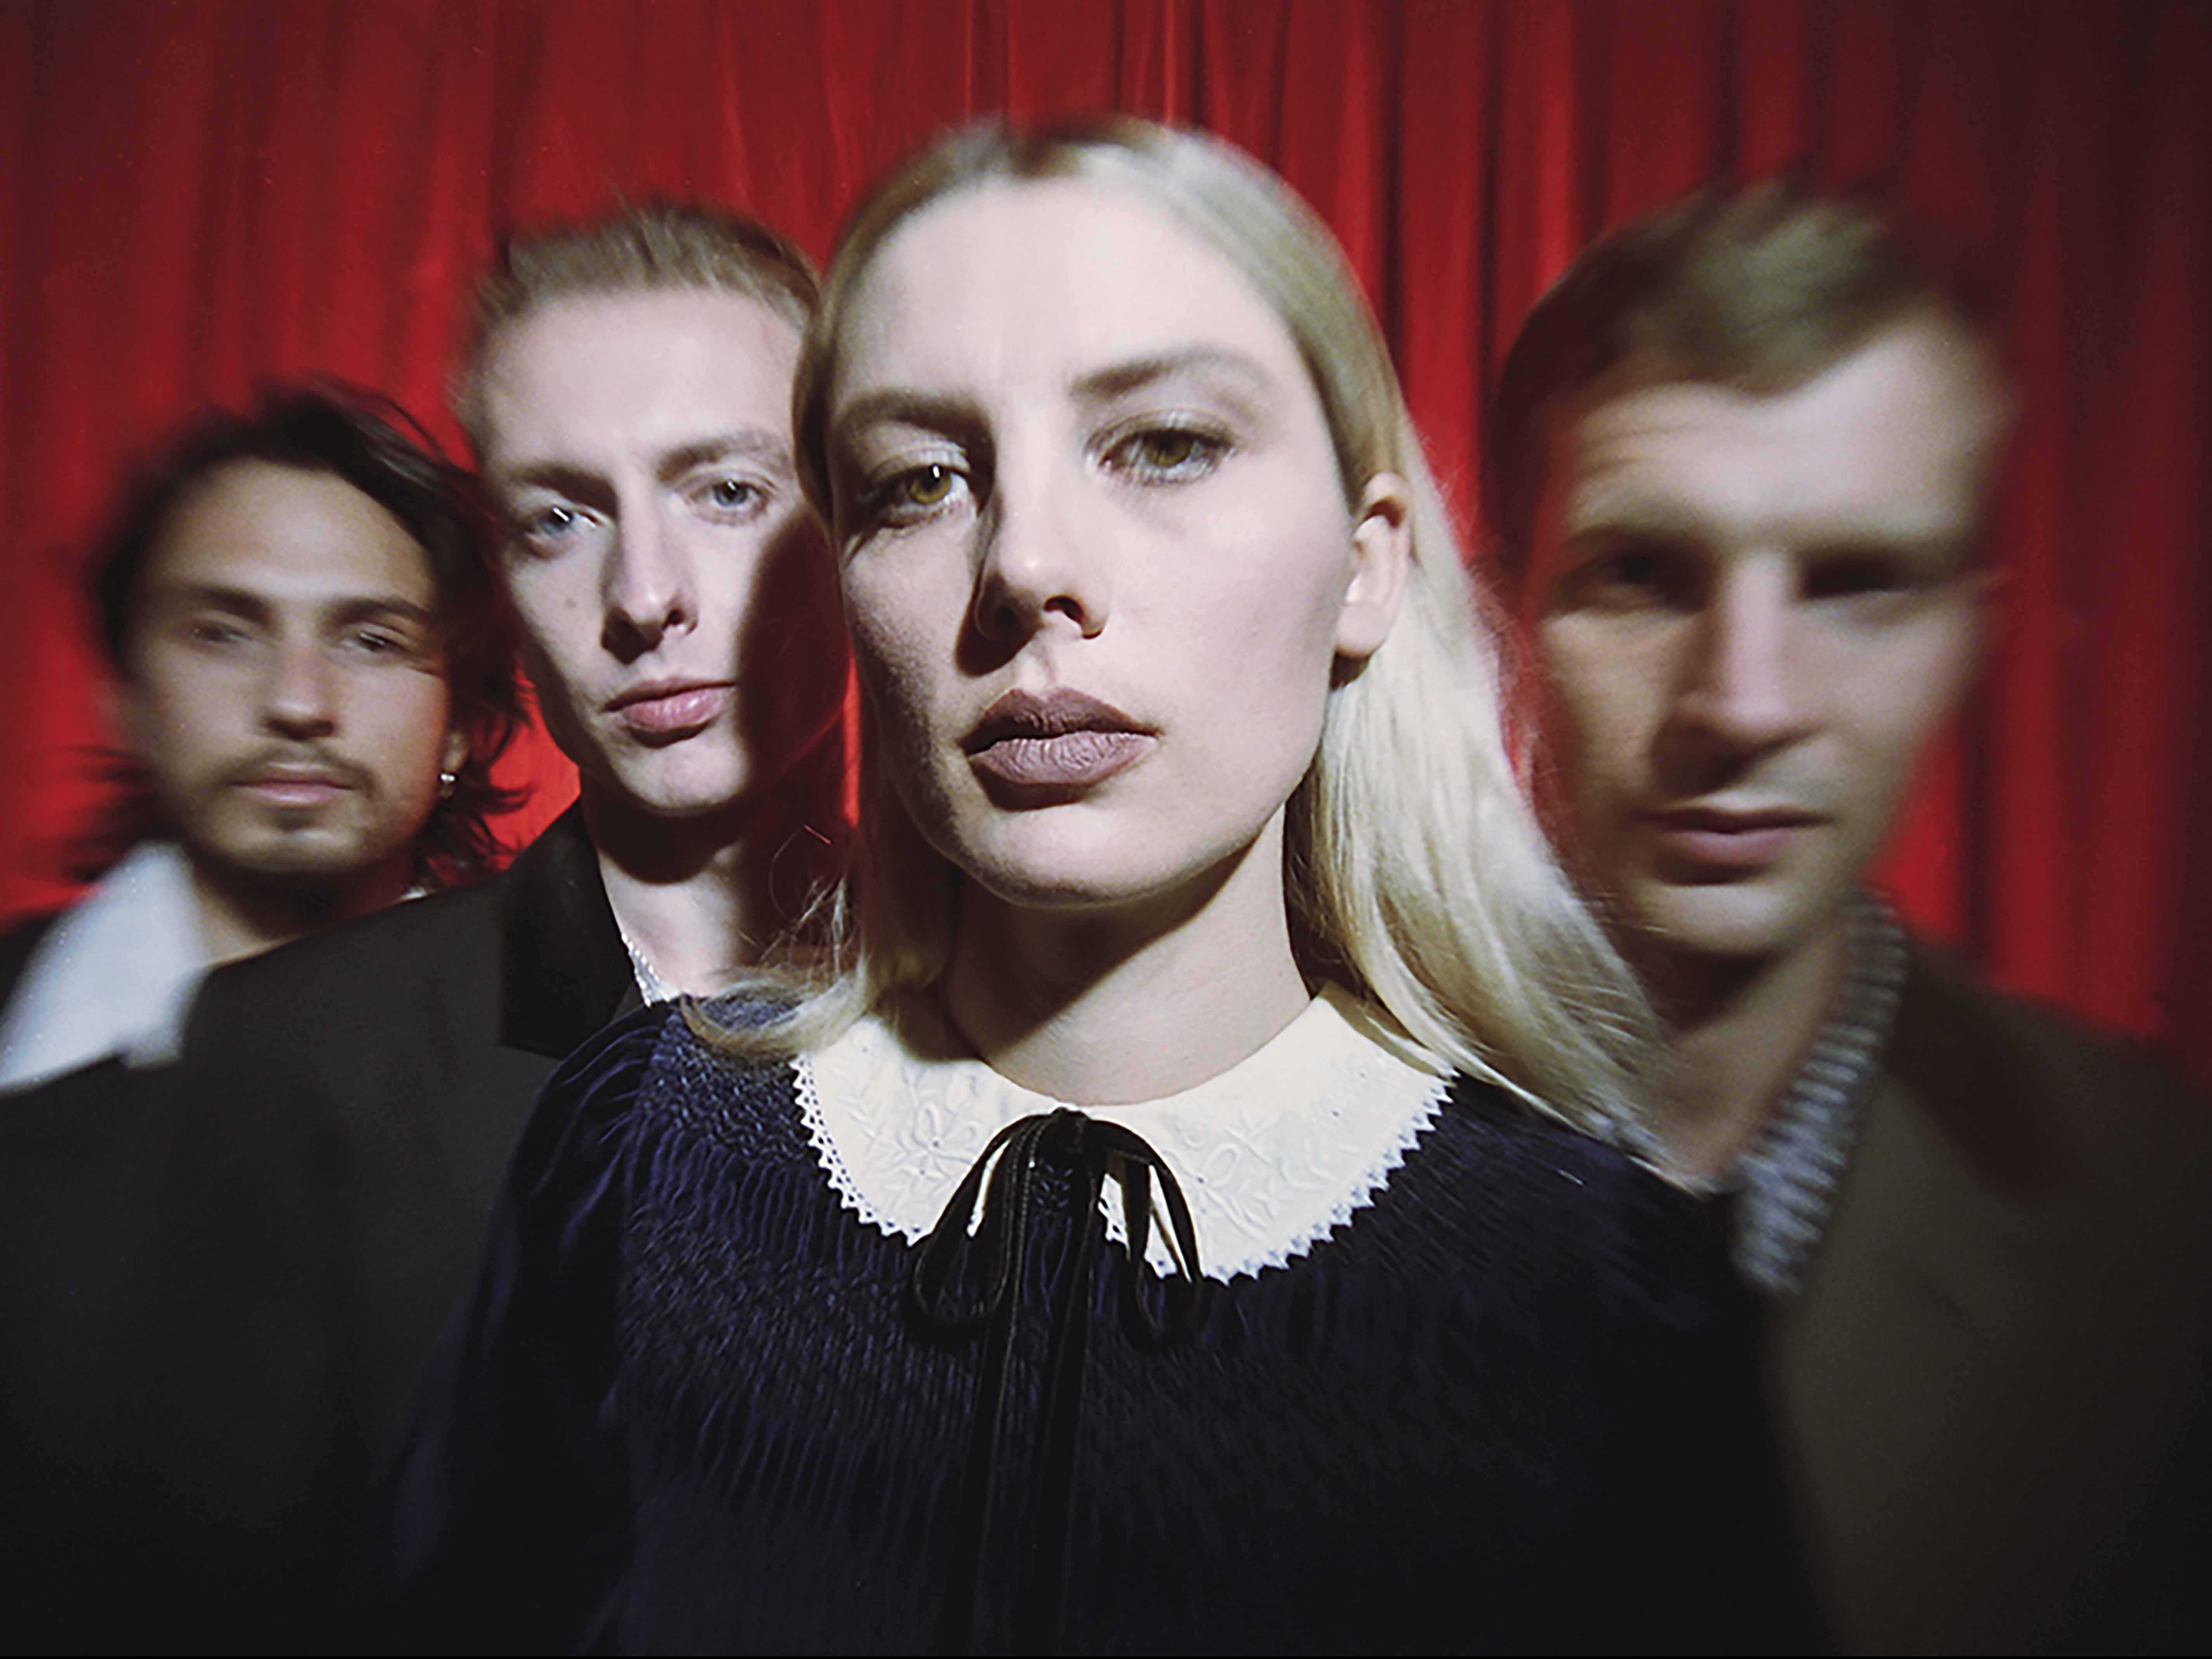 Wolf Alice: Ellie Rowsell sounds like she’s getting even more personal. There are more love songs than before. When required, she’s in full command of her anger